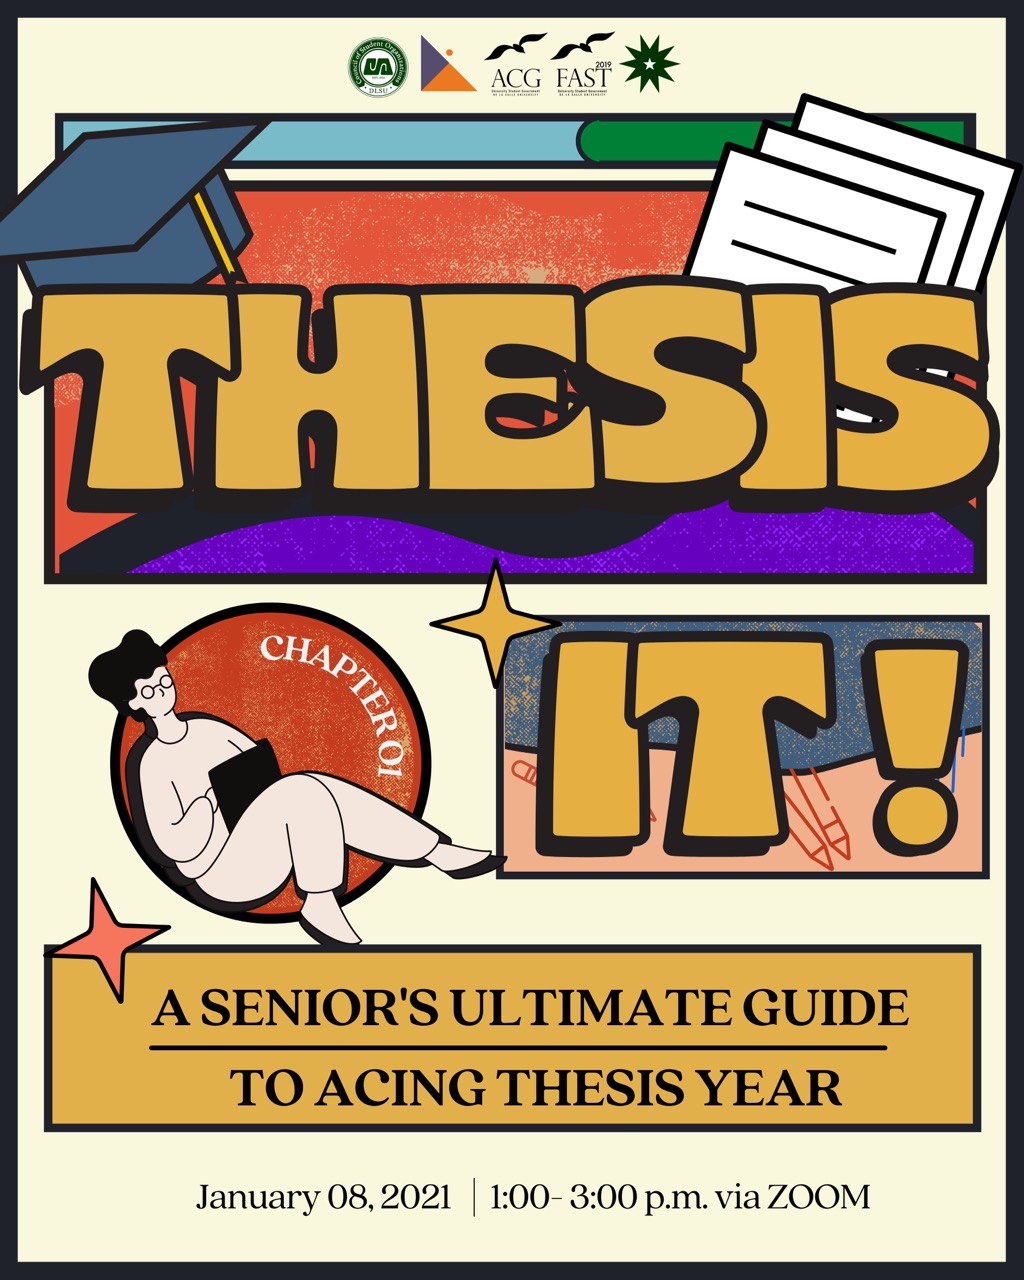 PRESS RELEASE: This is it, seniors! DEVINT launches THESIS IT!: A Senior’s Ultimate Guide to Acing Thesis Year